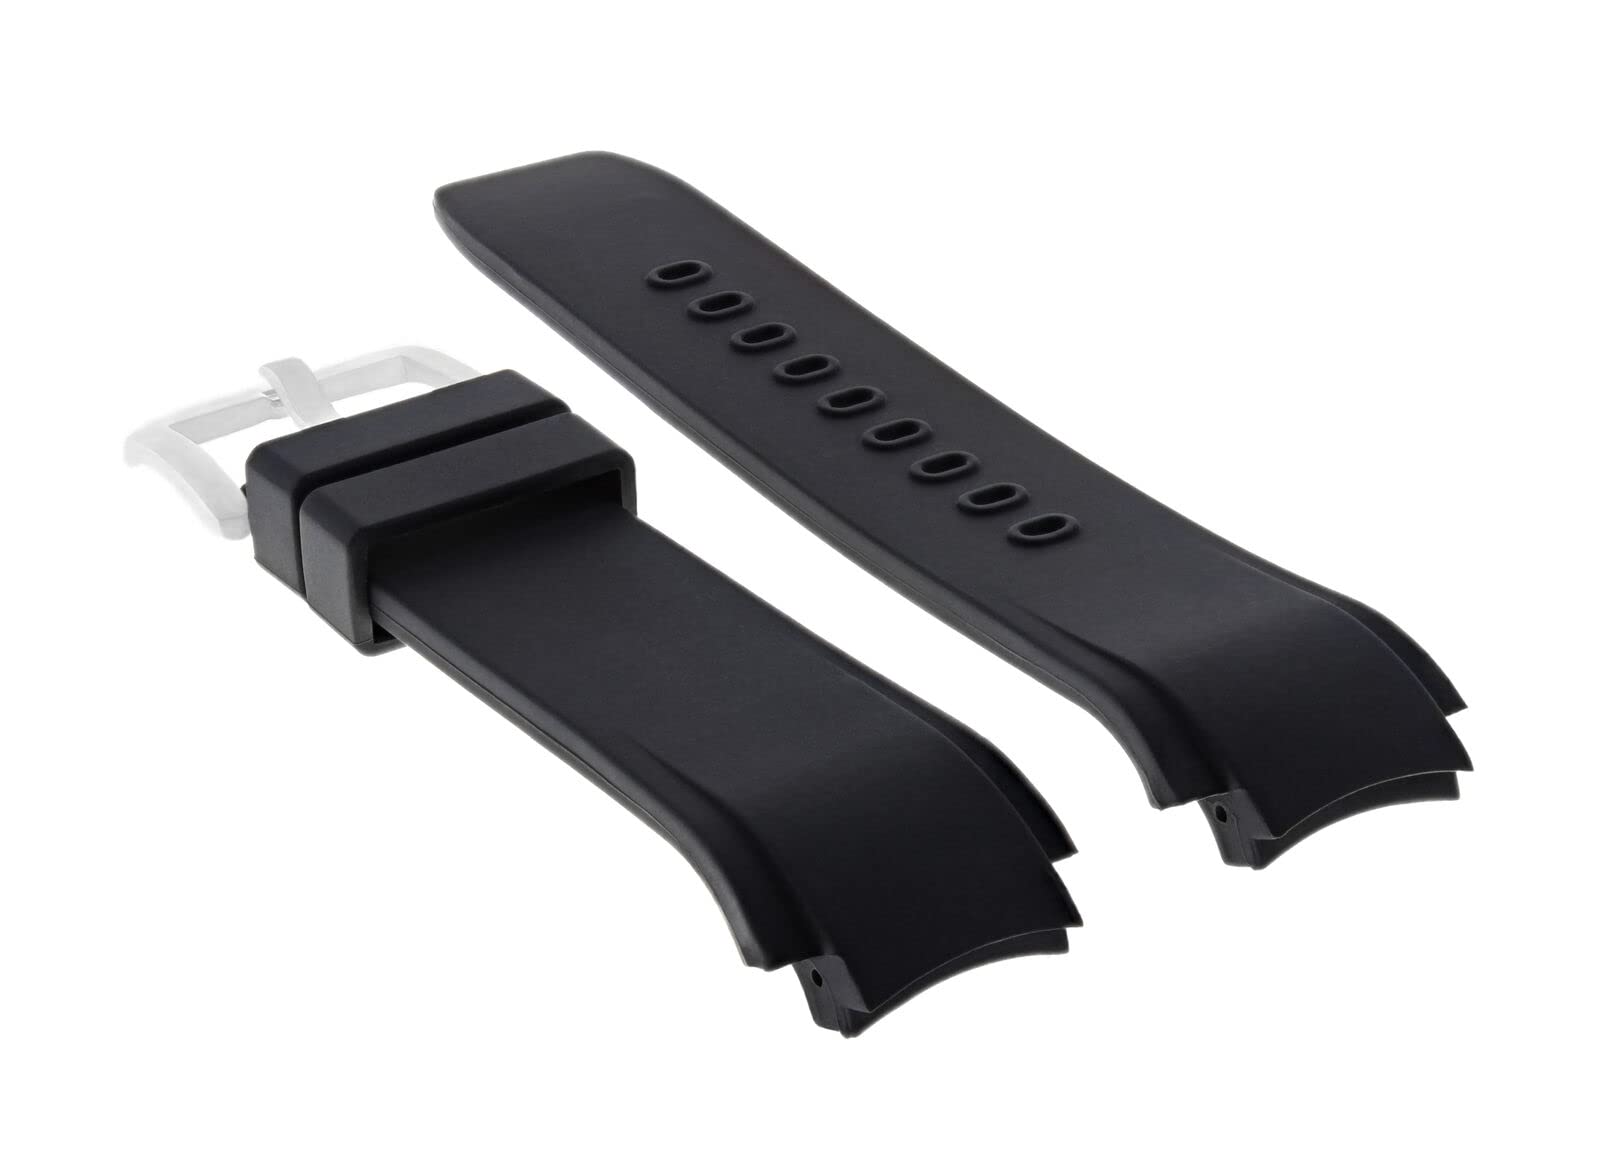 Ewatchparts SILICON RUBBER BAND STRAP FOR IWC 35380 353804 DUAL CROWN AQUATIMER BLACK